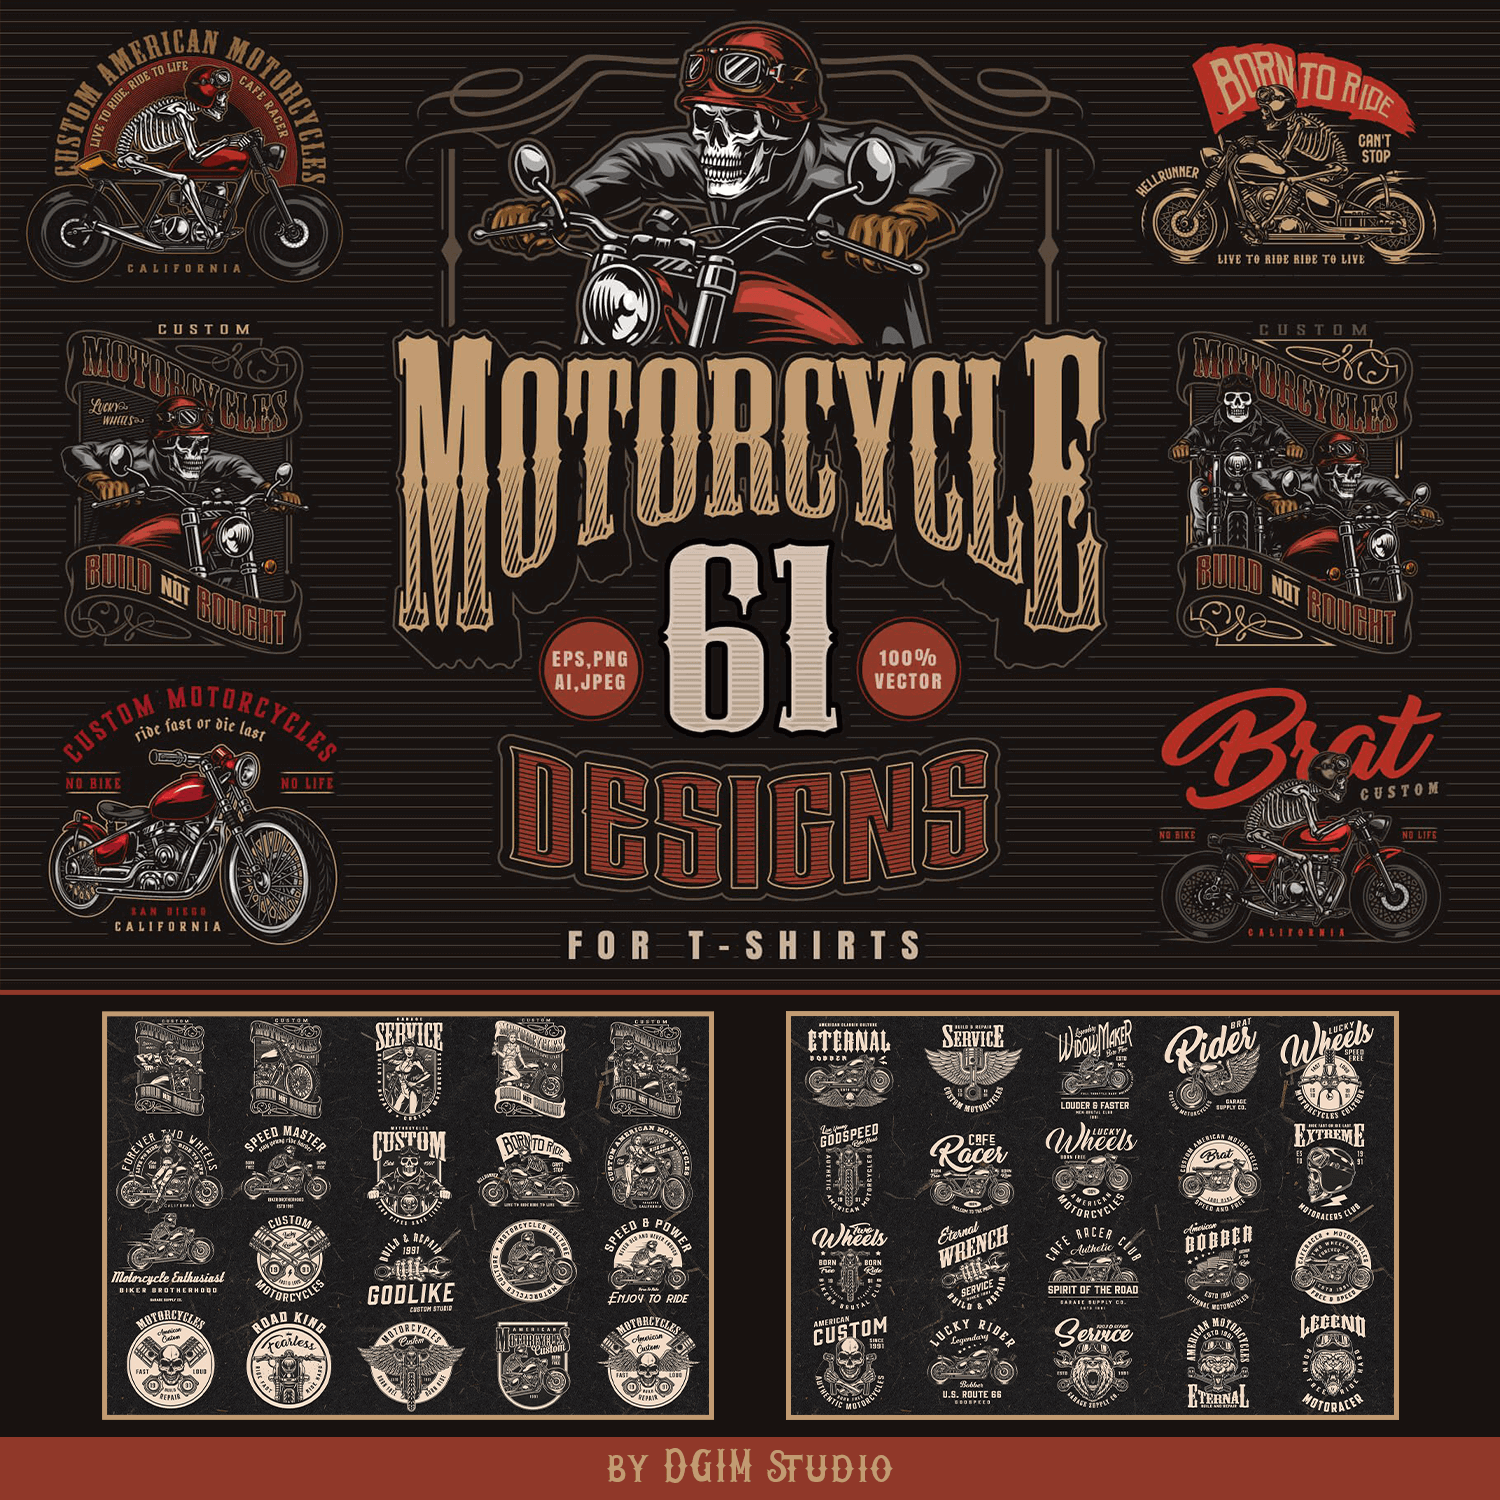 Logos of motorcycle 61 designs for T-shirt.